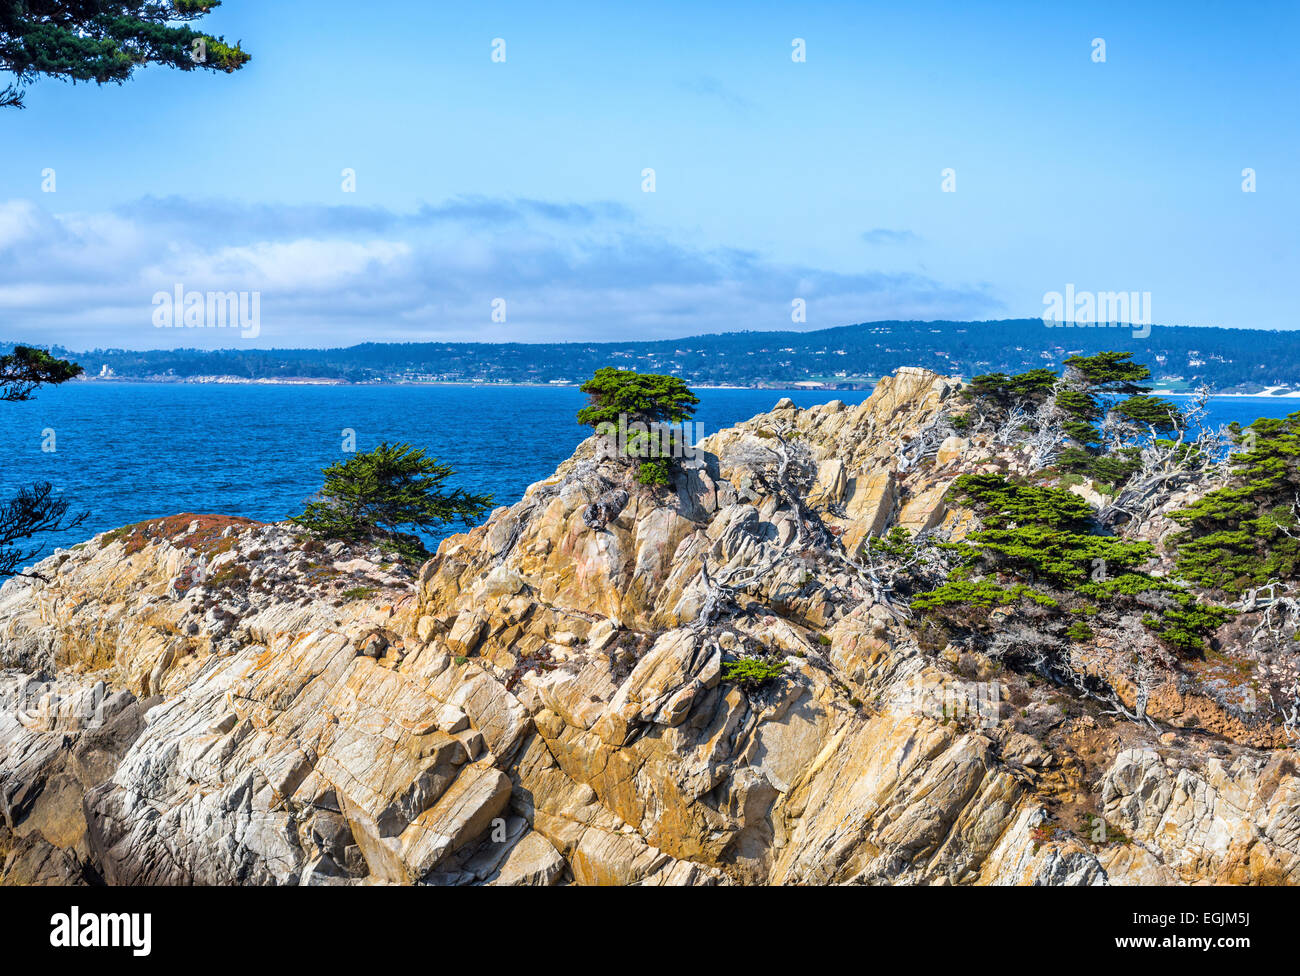 Point Lobos State Reserve. Monterey county, California, United States. Stock Photo